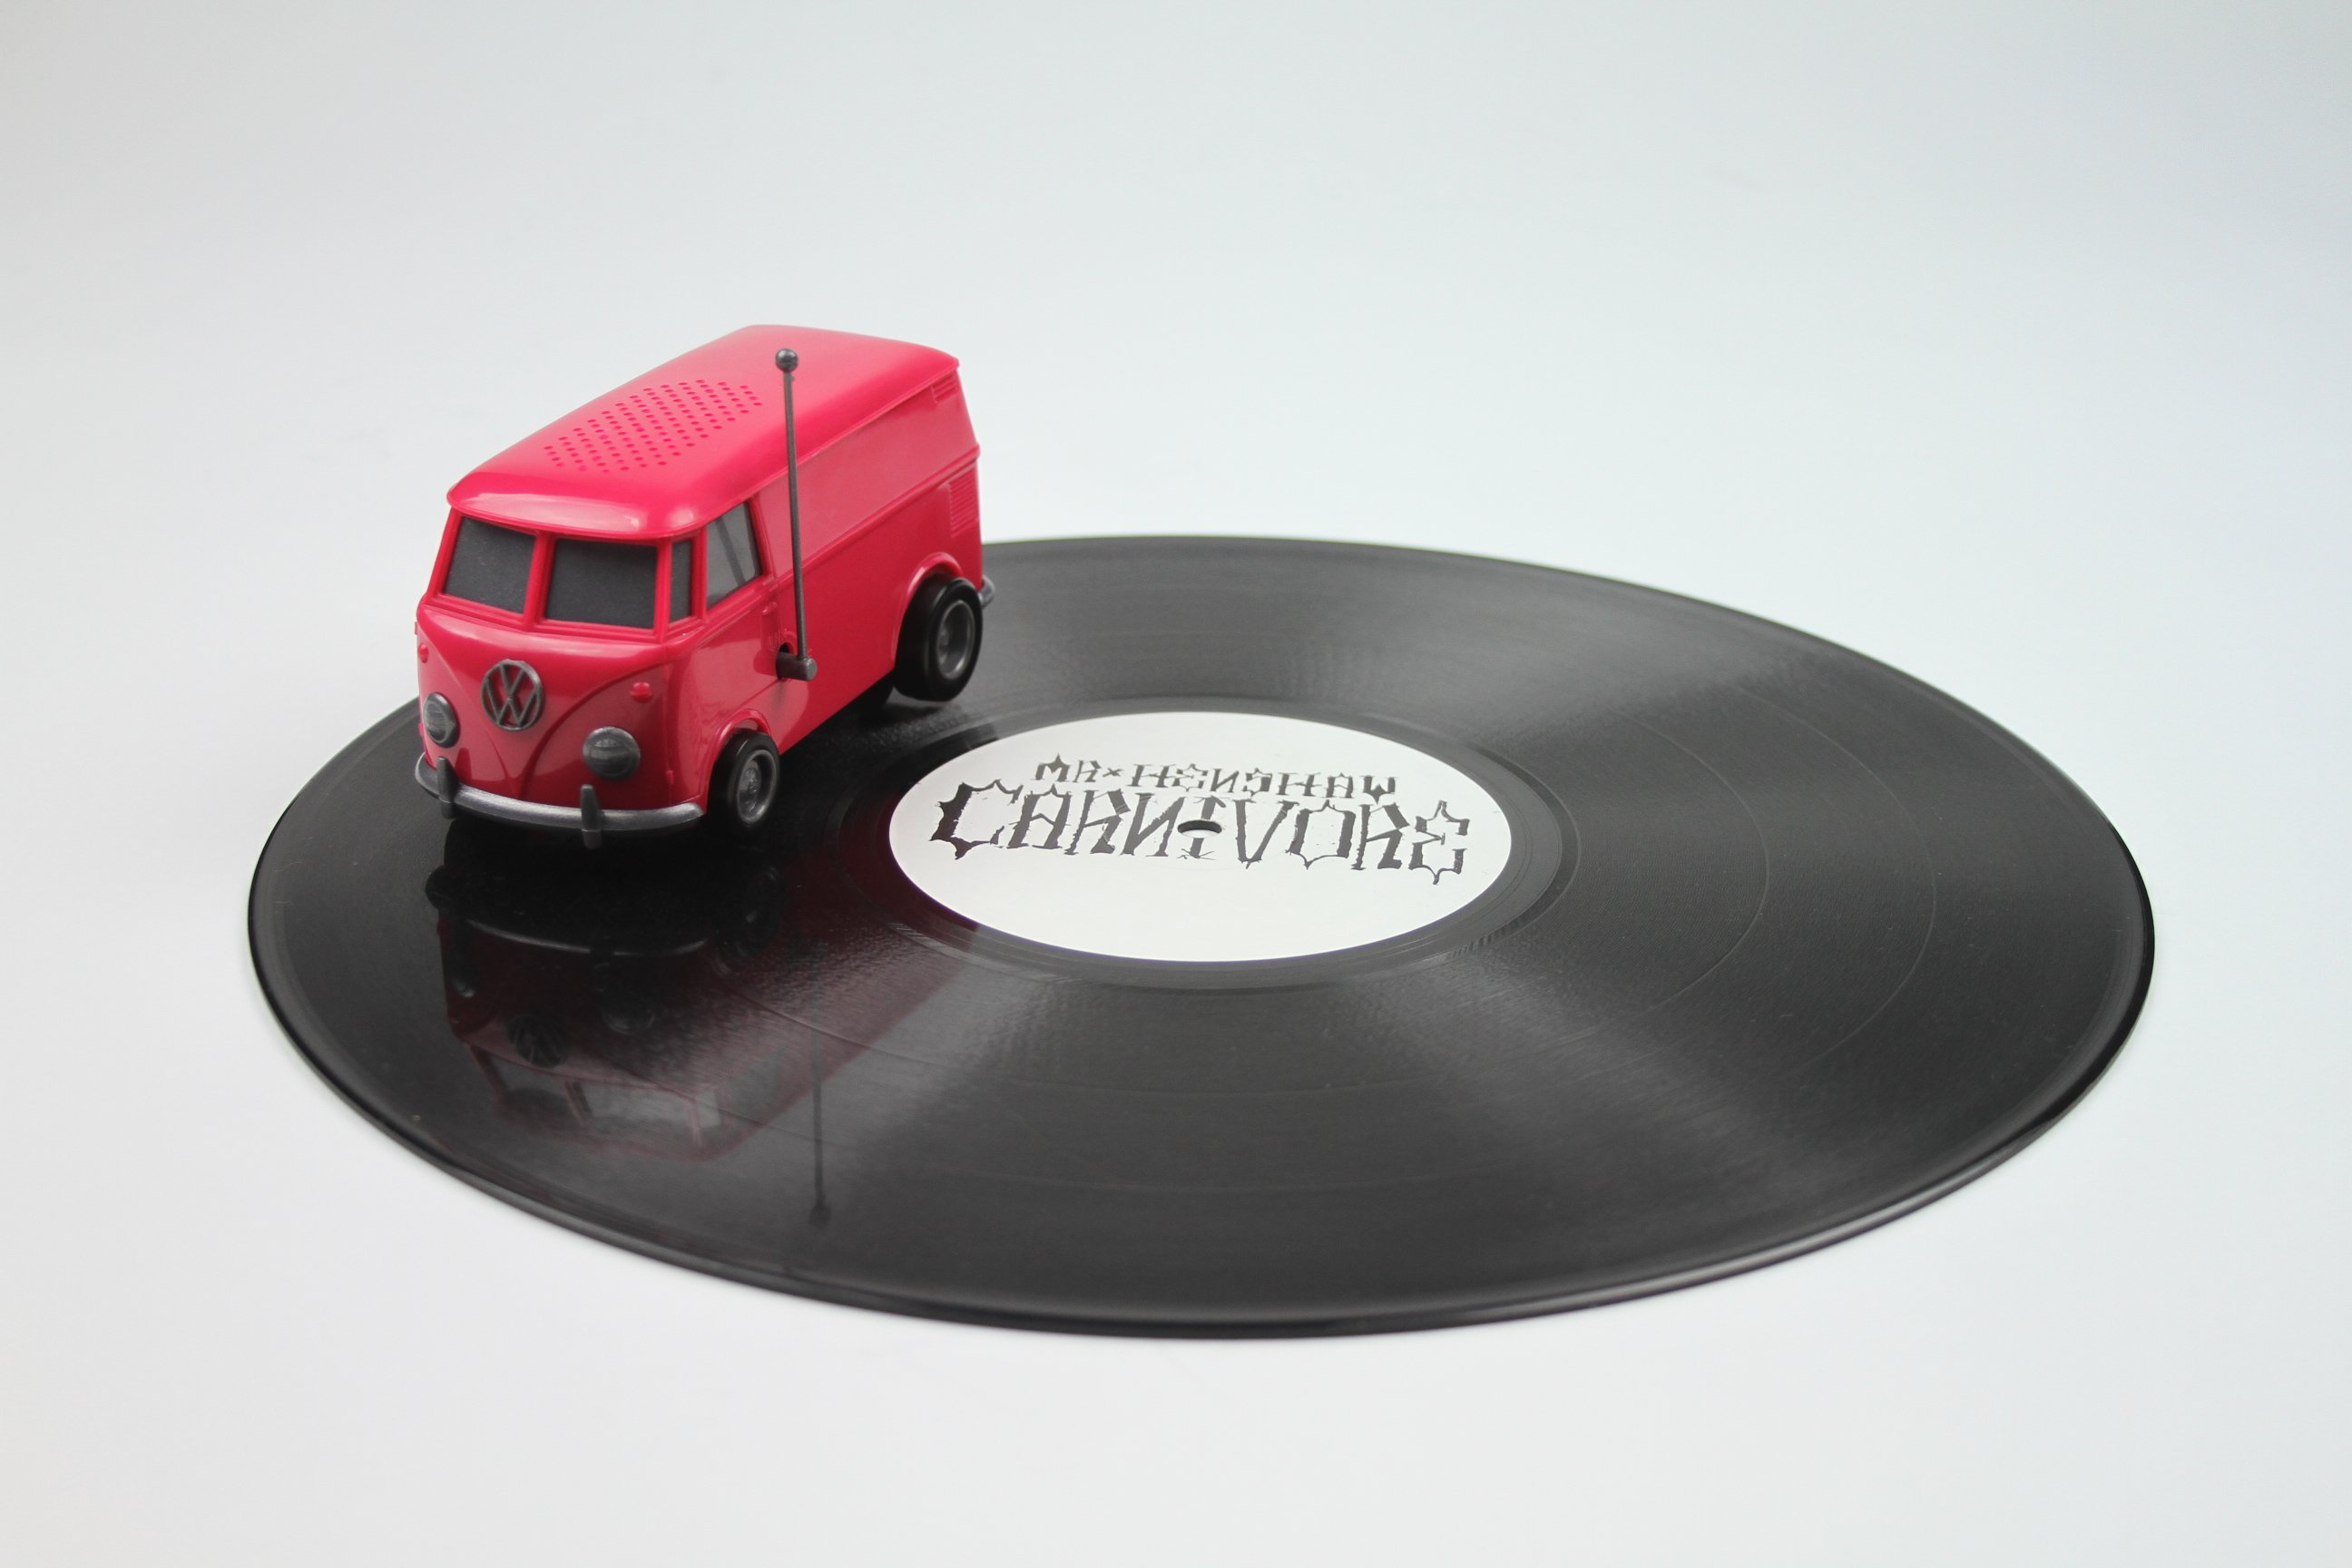 An Awesome Way to Play Your Vinyl Records